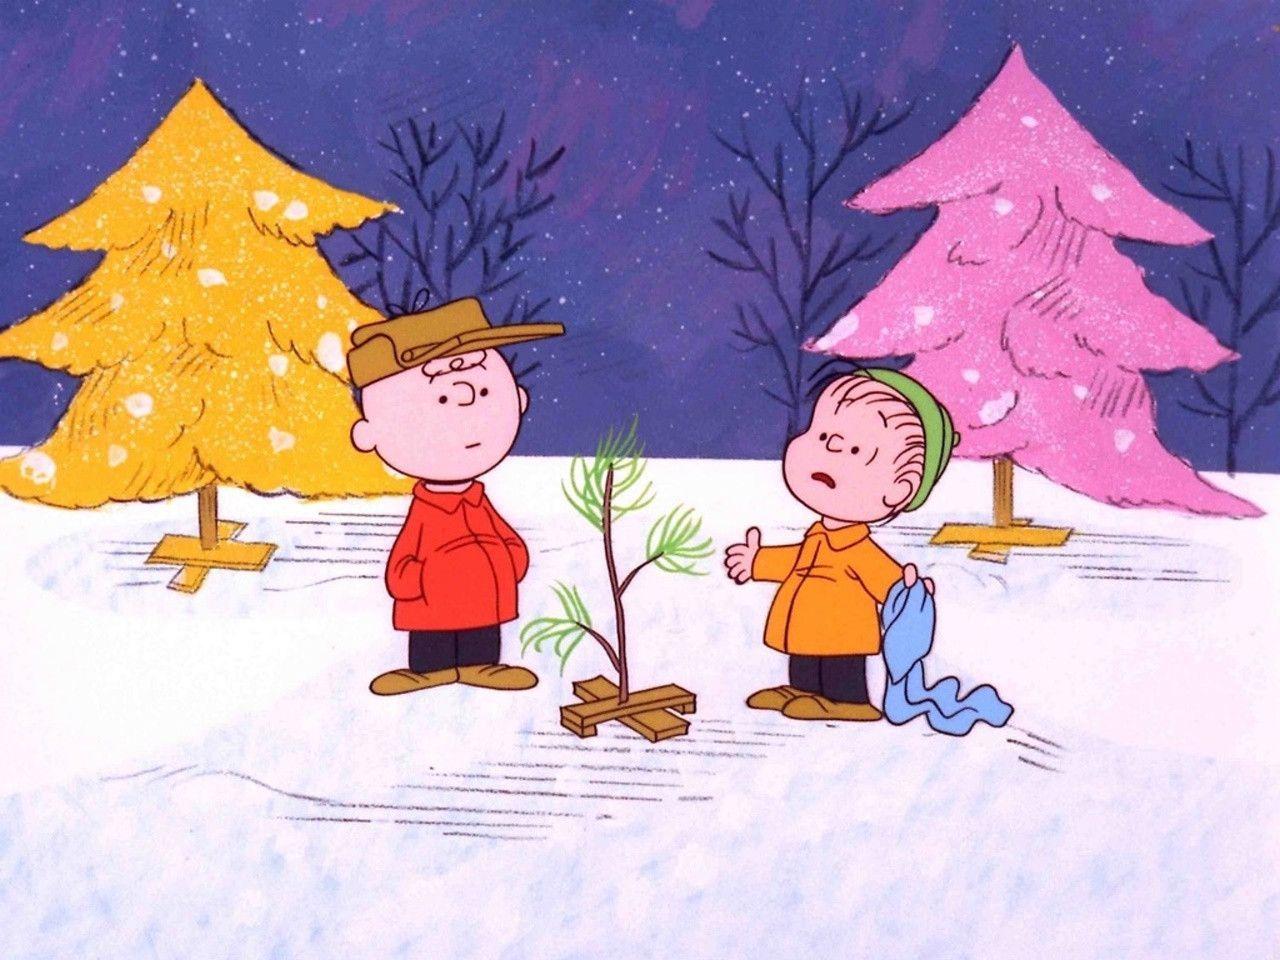 Free Charlie Brown Wallpapers - Wallpaper Cave